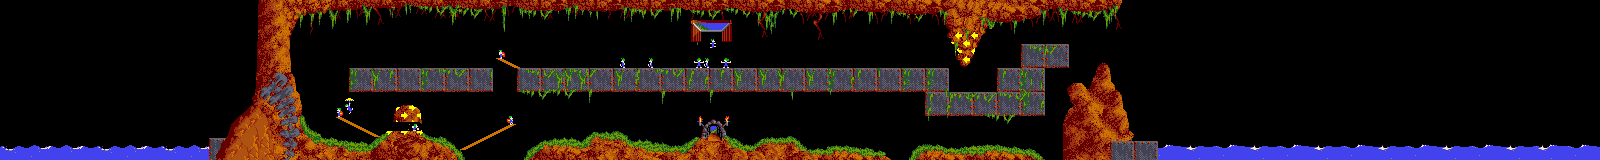 Overview: Lemmings, Amiga, Tricky, 9 - They just keep on coming